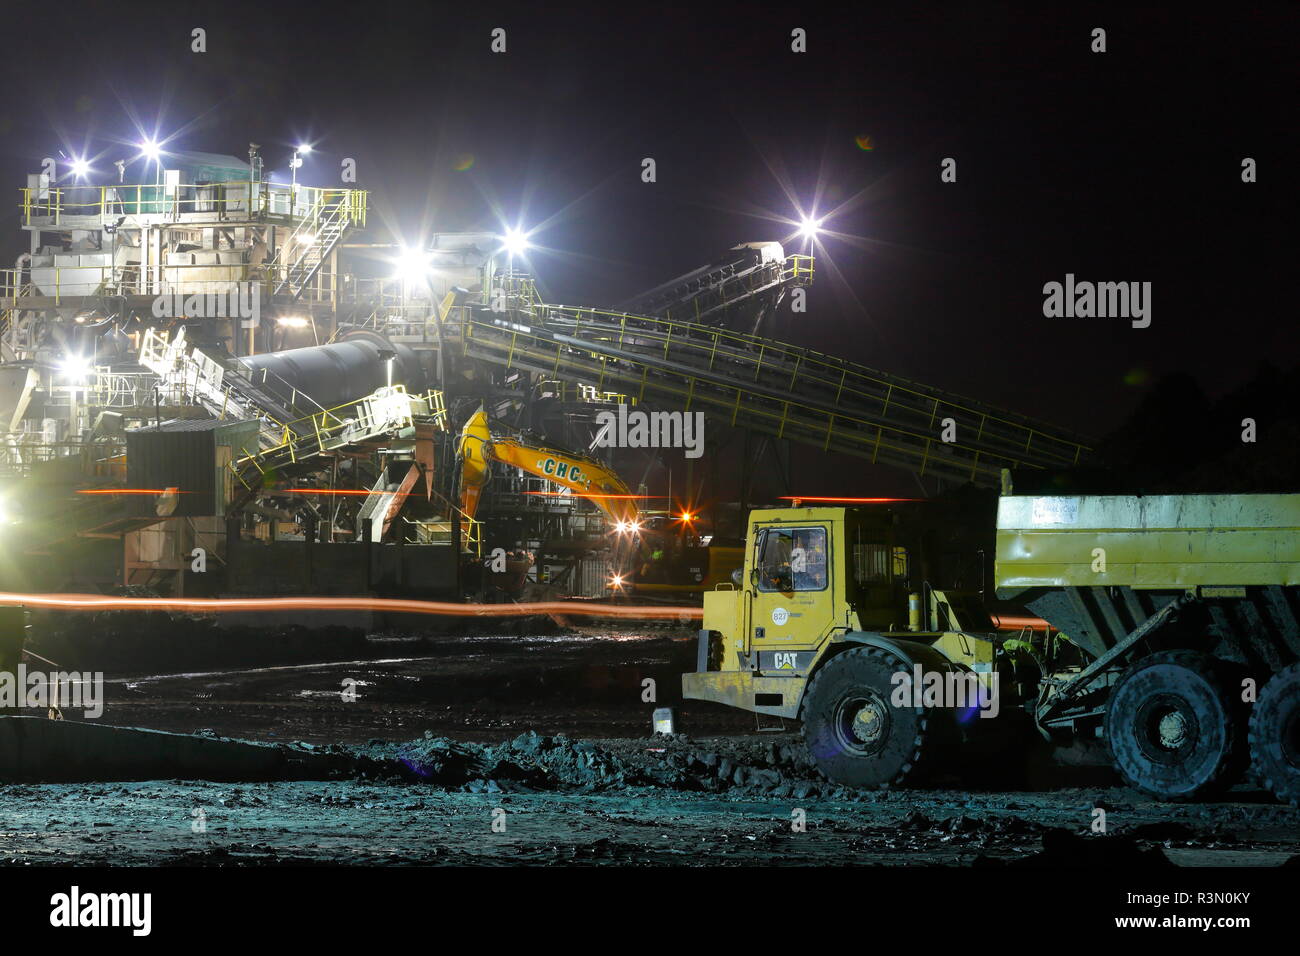 A night view of the Recycoal Coal Recycling Plant in Rossington,Doncaster which has now been demolished to make way for new houses. Stock Photo